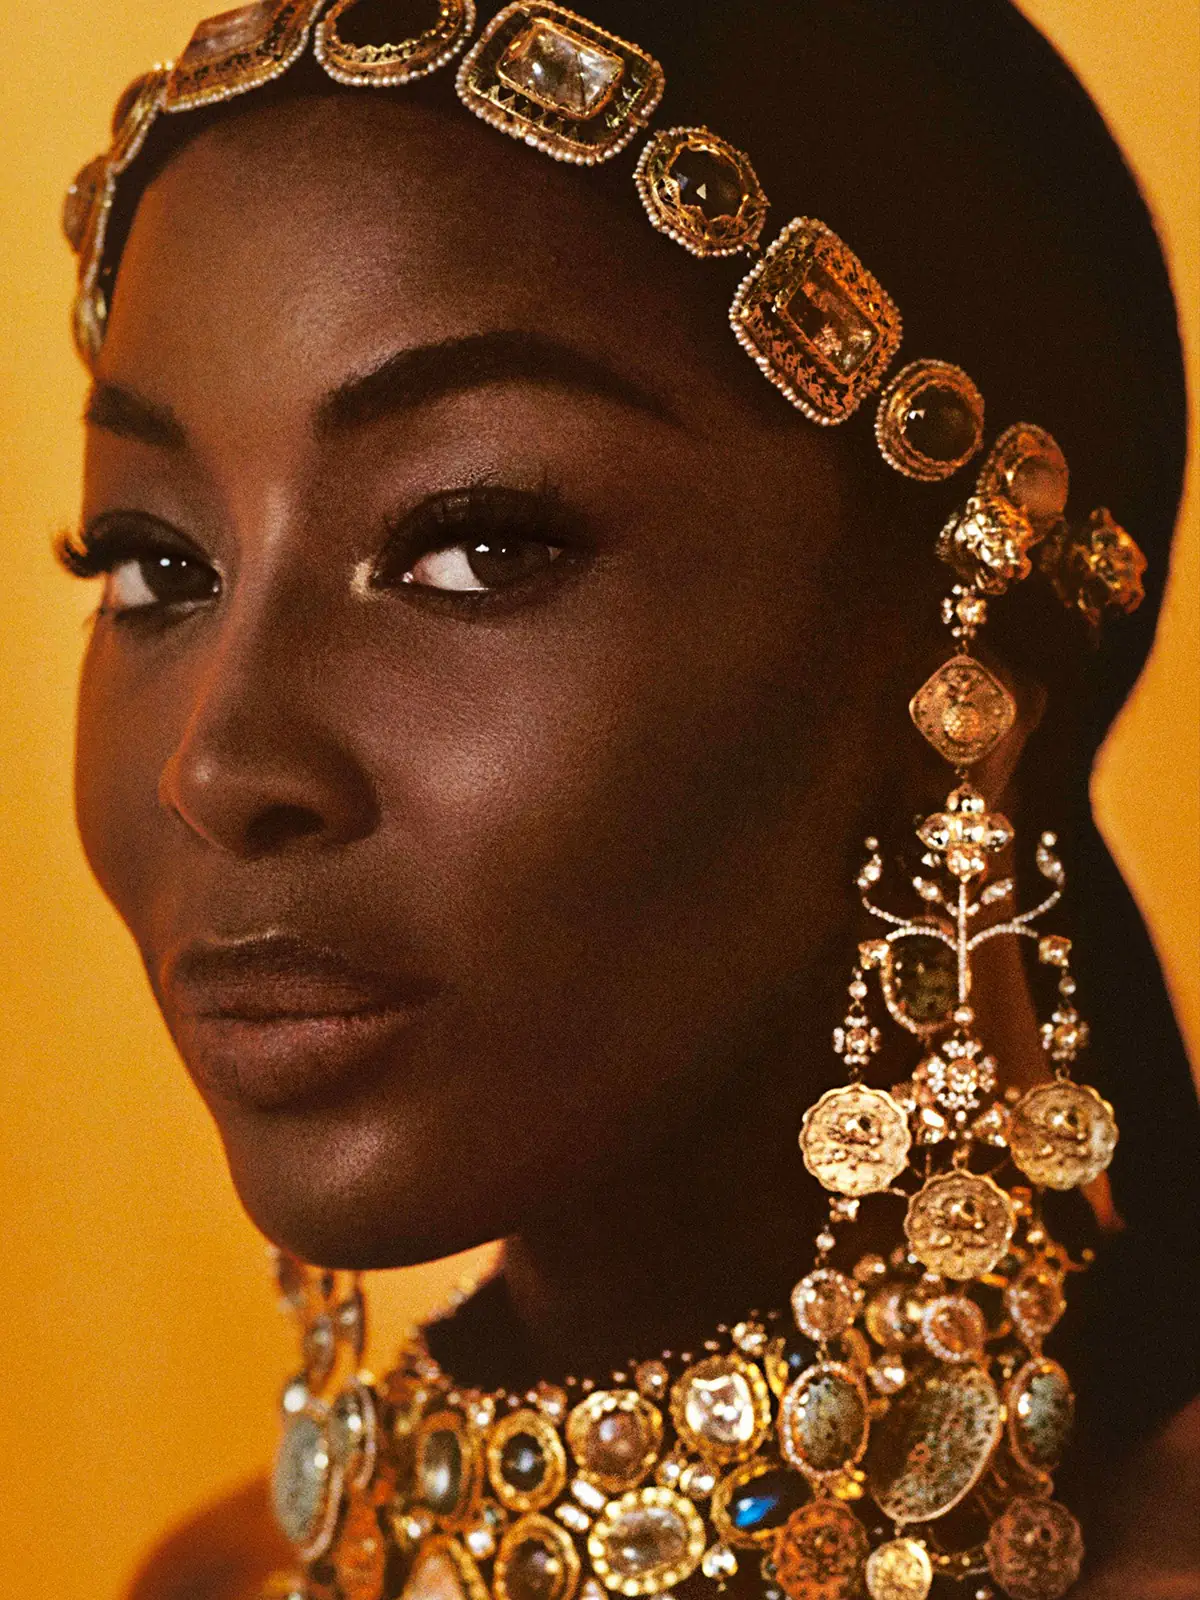 Naomi Campbell covers Vogue India March April 2023 by Campbell Addy